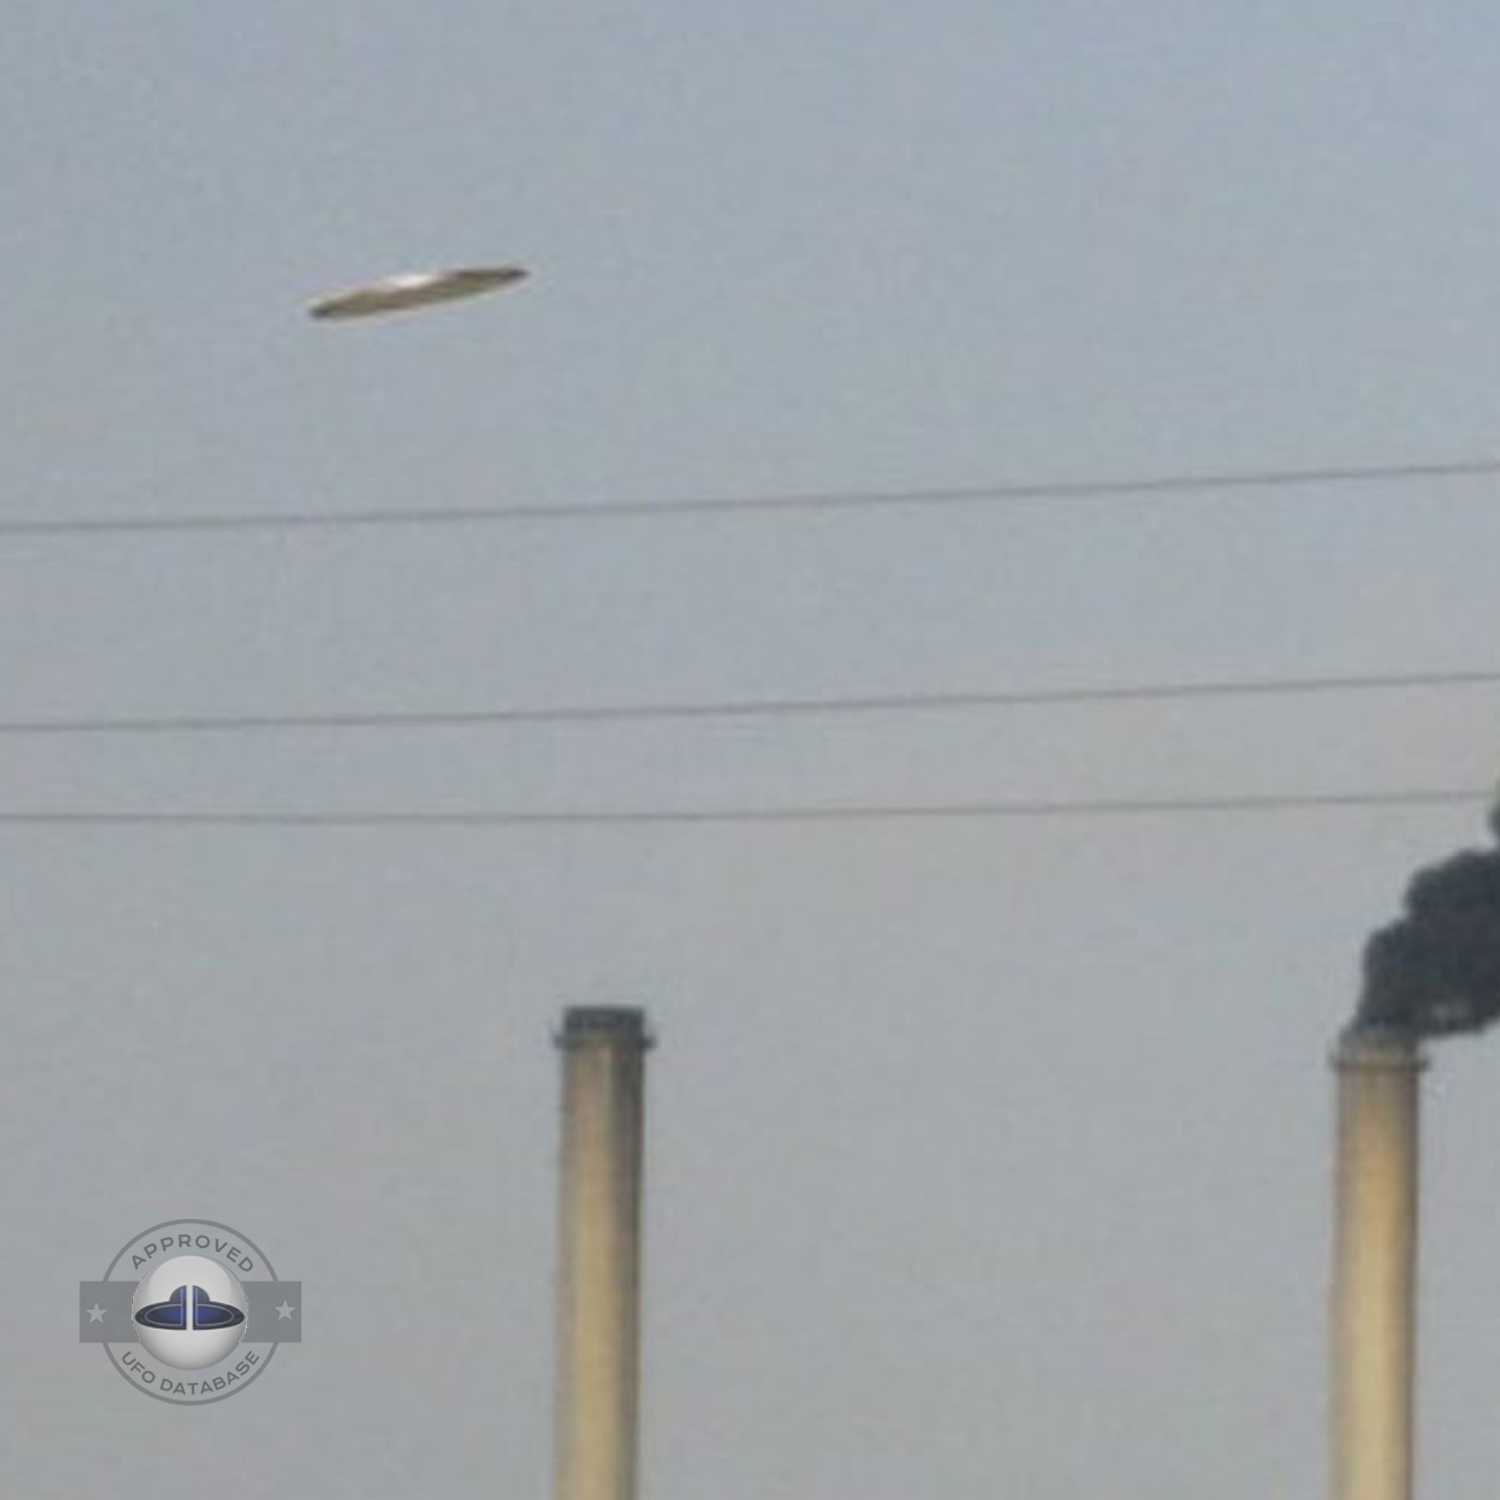 The flying saucer is flying over an industrial factory in Baghdad UFO Picture #58-3